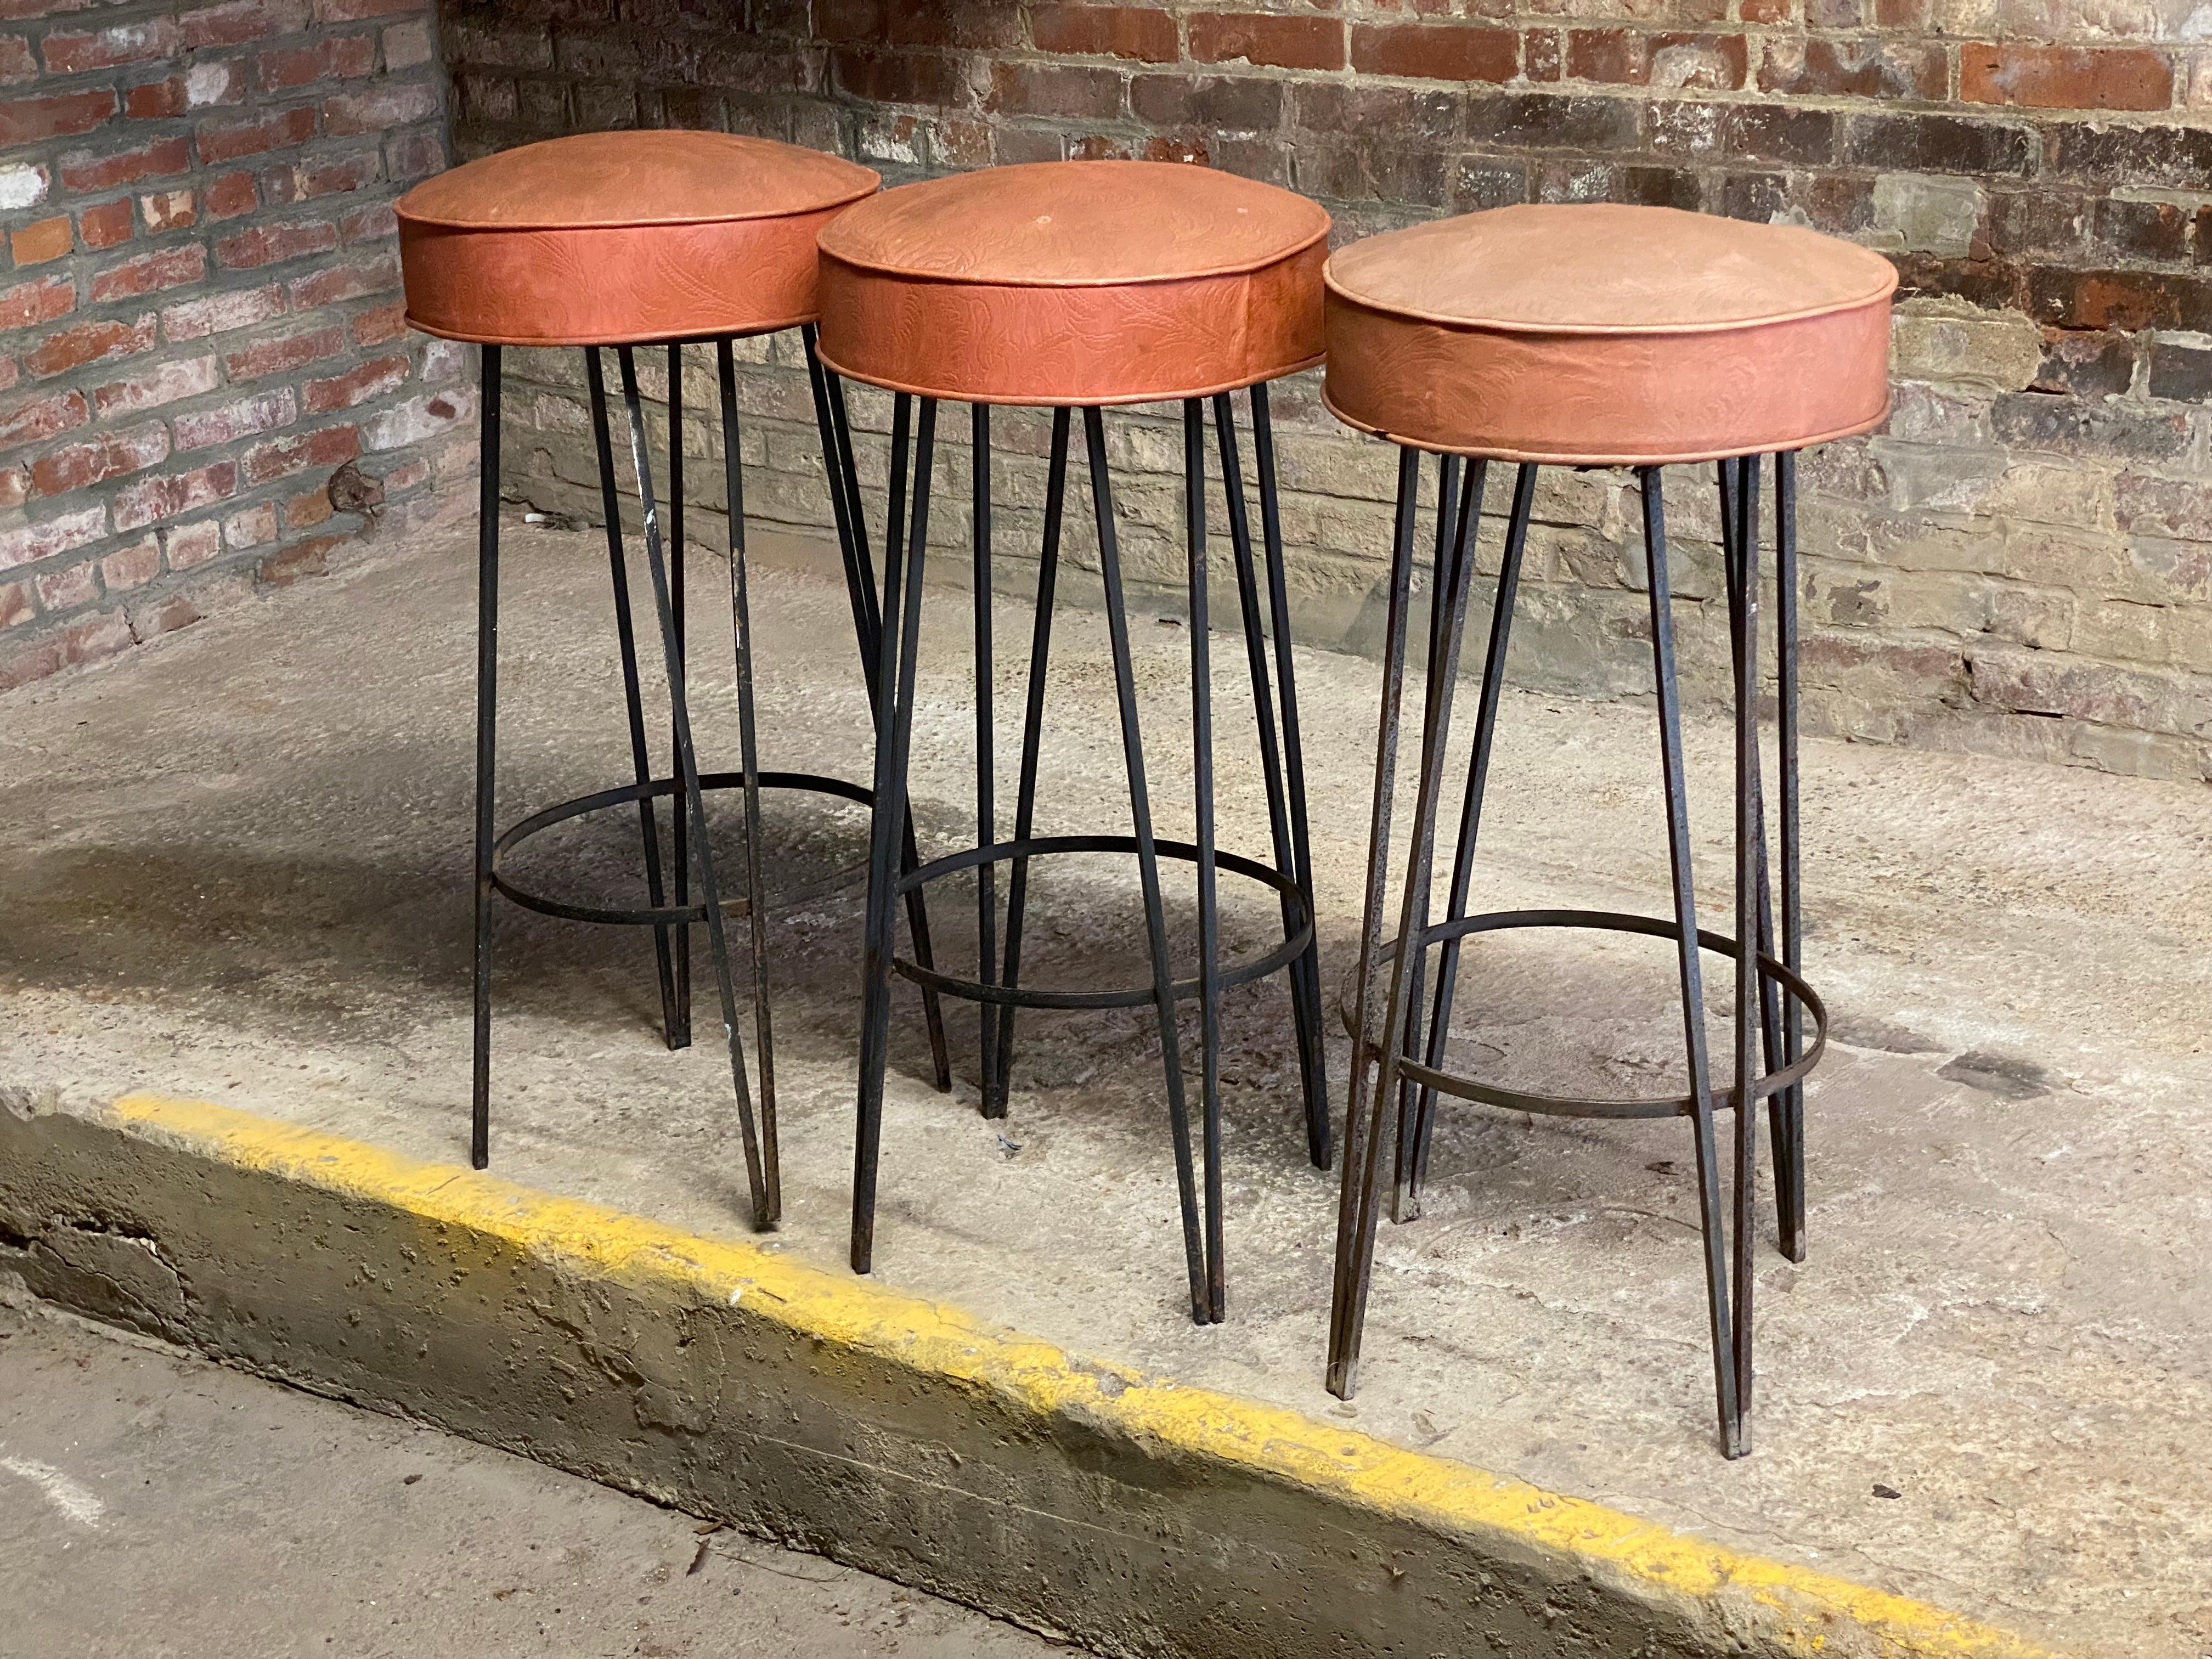 Three stools from World Seating, Inc., Bowery, NYC. Stationary seats that do not swivel. Floral vinyl upholstered seats. 

Good overall condition and structurally sound and sturdy. All welds are visibly intact. Some light rust and minor cosmetic